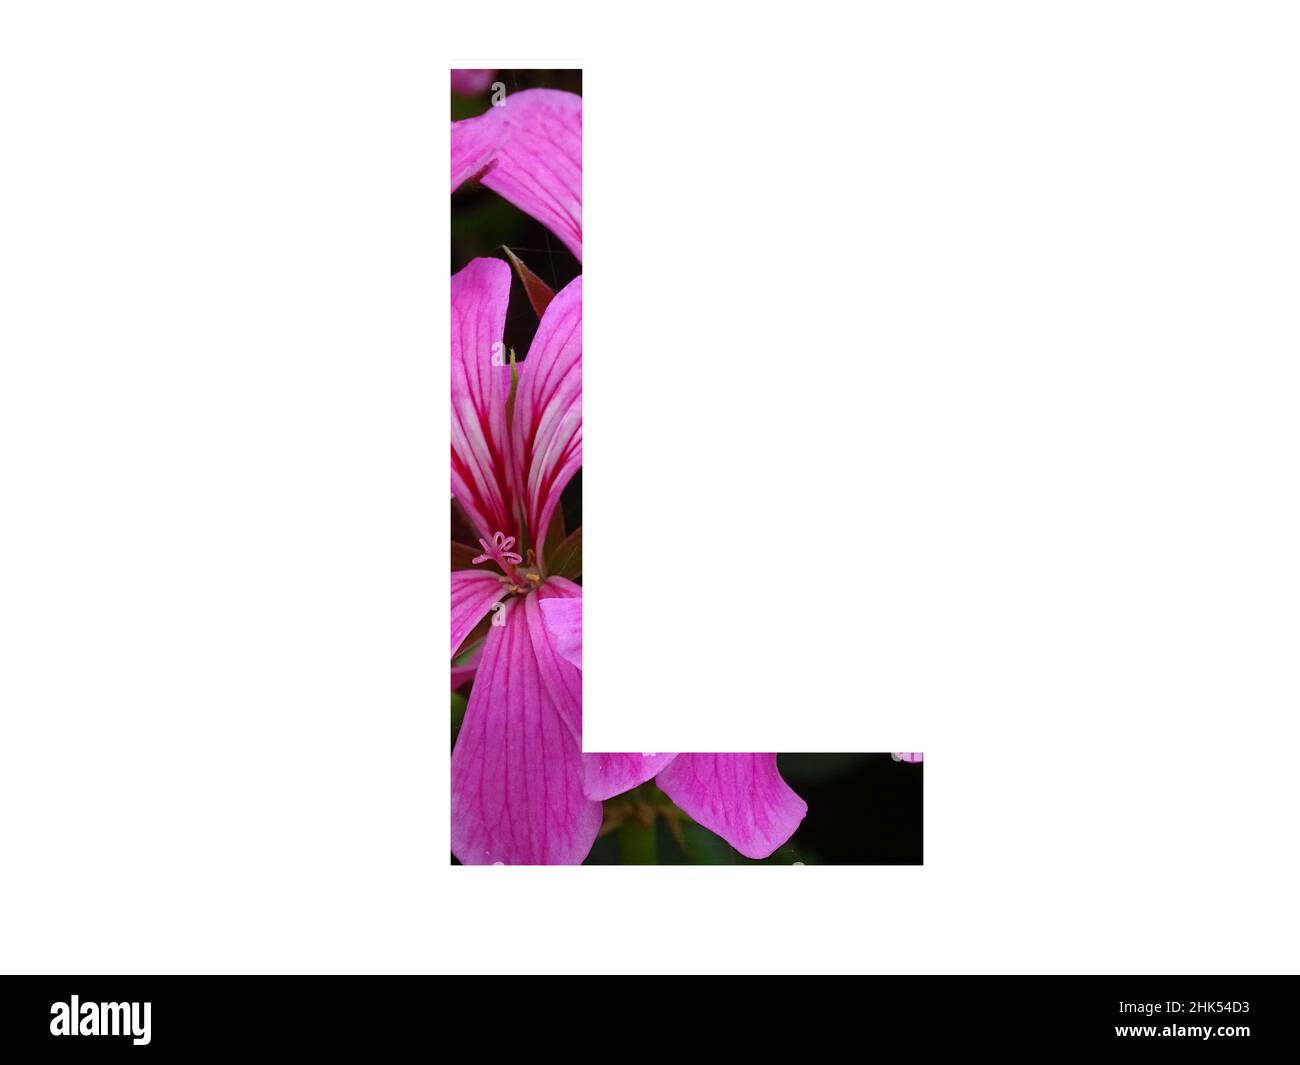 Letter L of the alphabet made with a pink flower of pelargonium, isolated on a white background Stock Photo